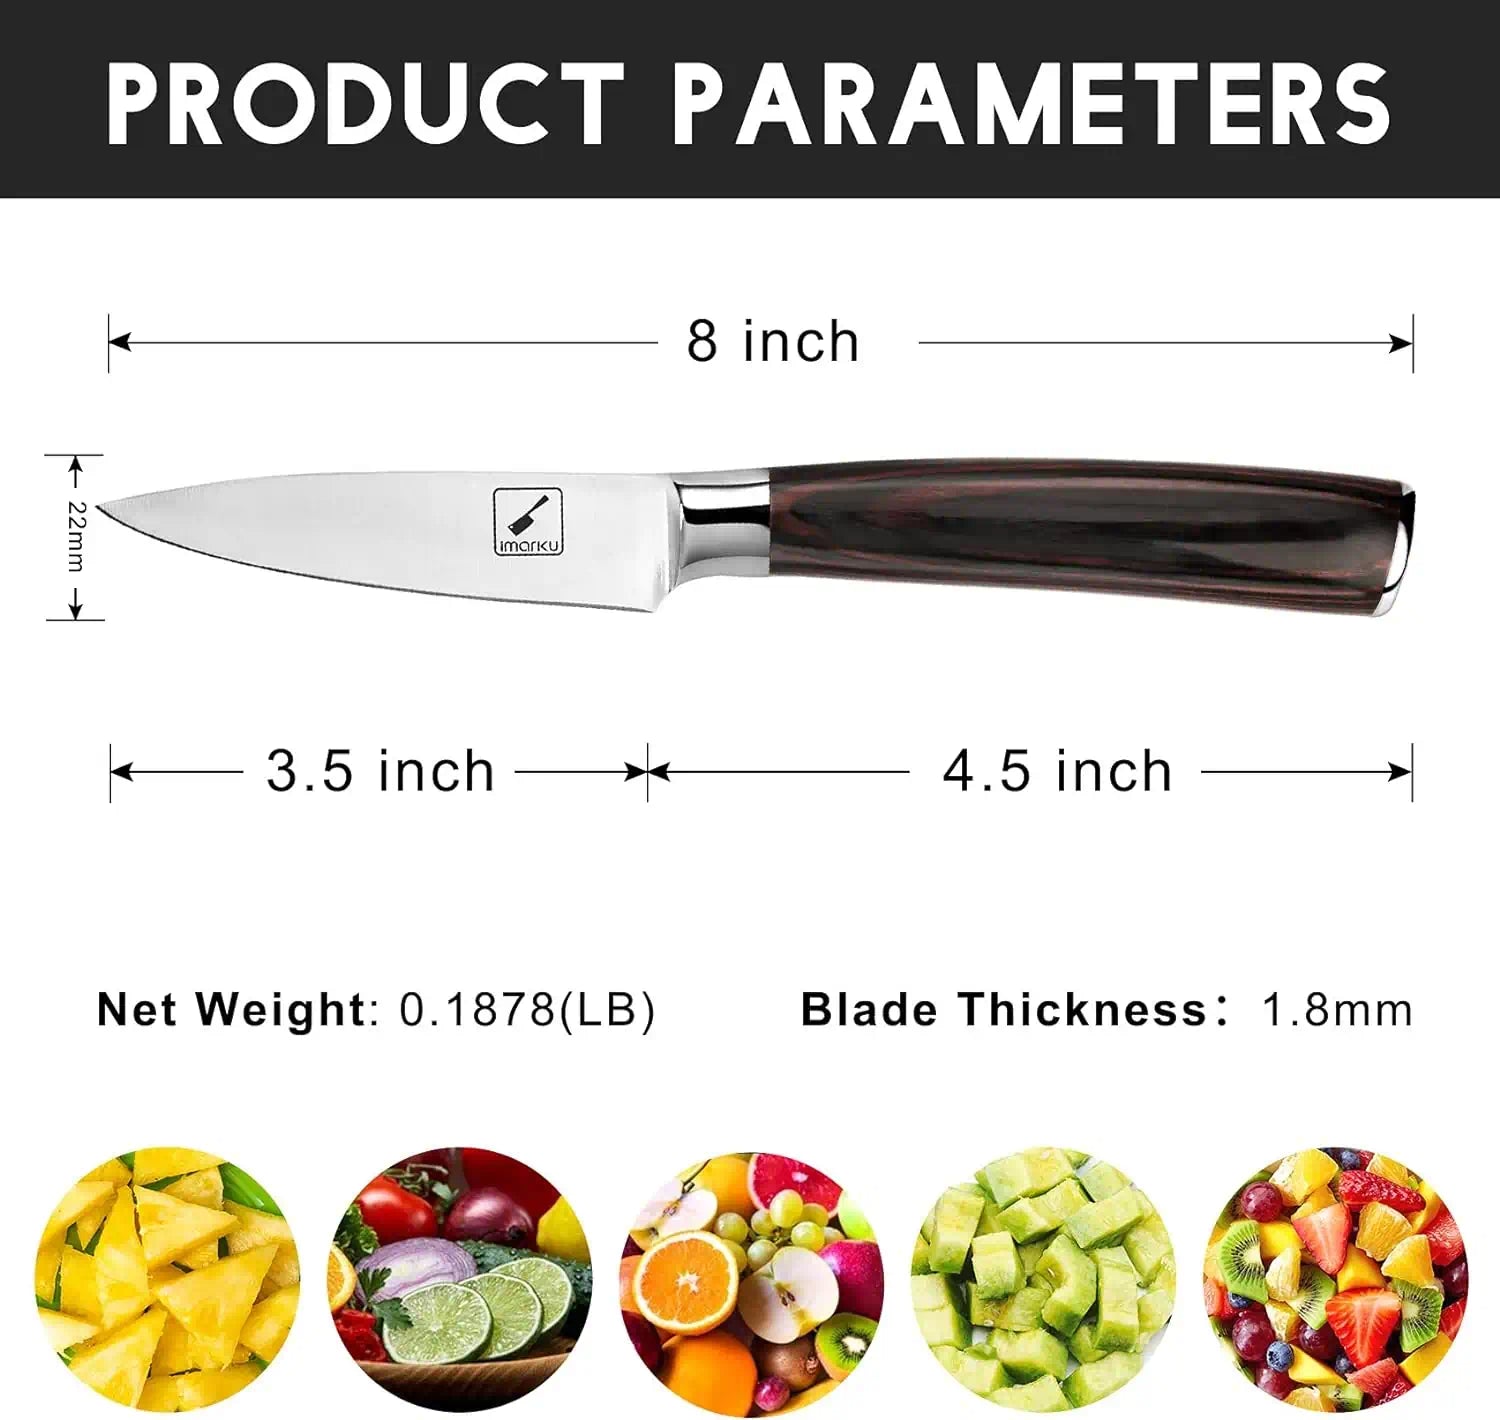 Paring Knife 3.5 inch Small Kitchen Knife, Sharp Fruit Knife Stainless  Steel